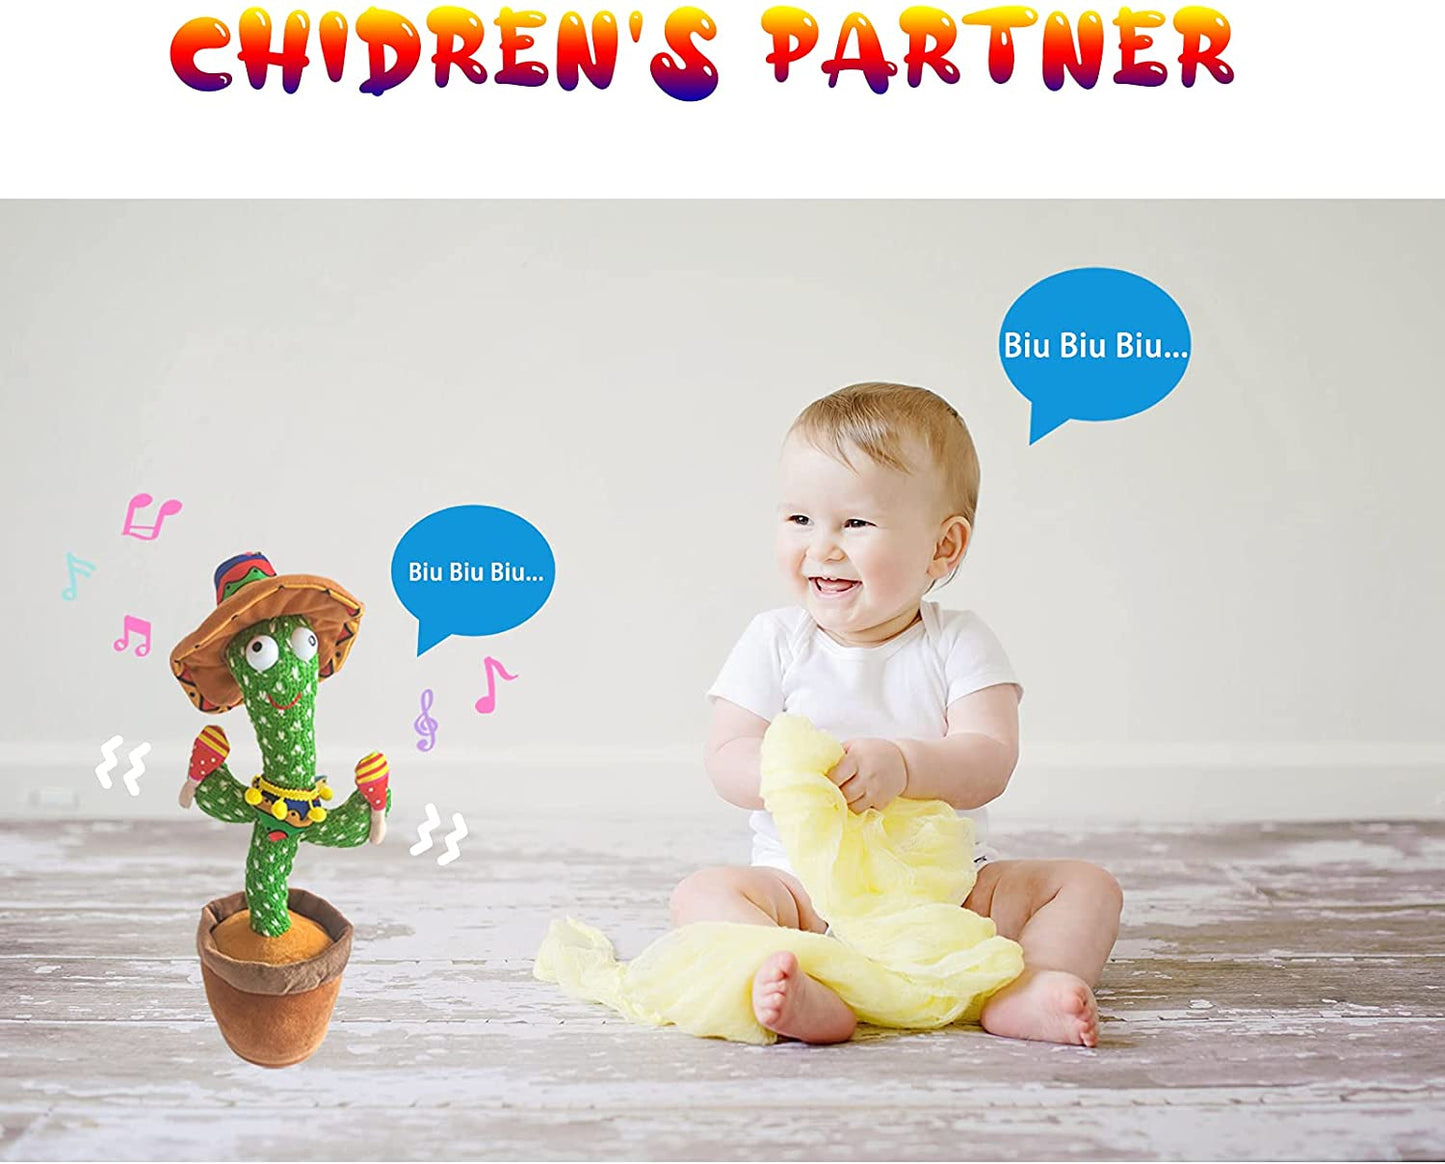 【Toys】Dancing Cactus Plush Toy - USB Charging,Sing Songs,Recording,Repeats and emit Colored Lights,Gifts of Fun Toys for Boys and Girls